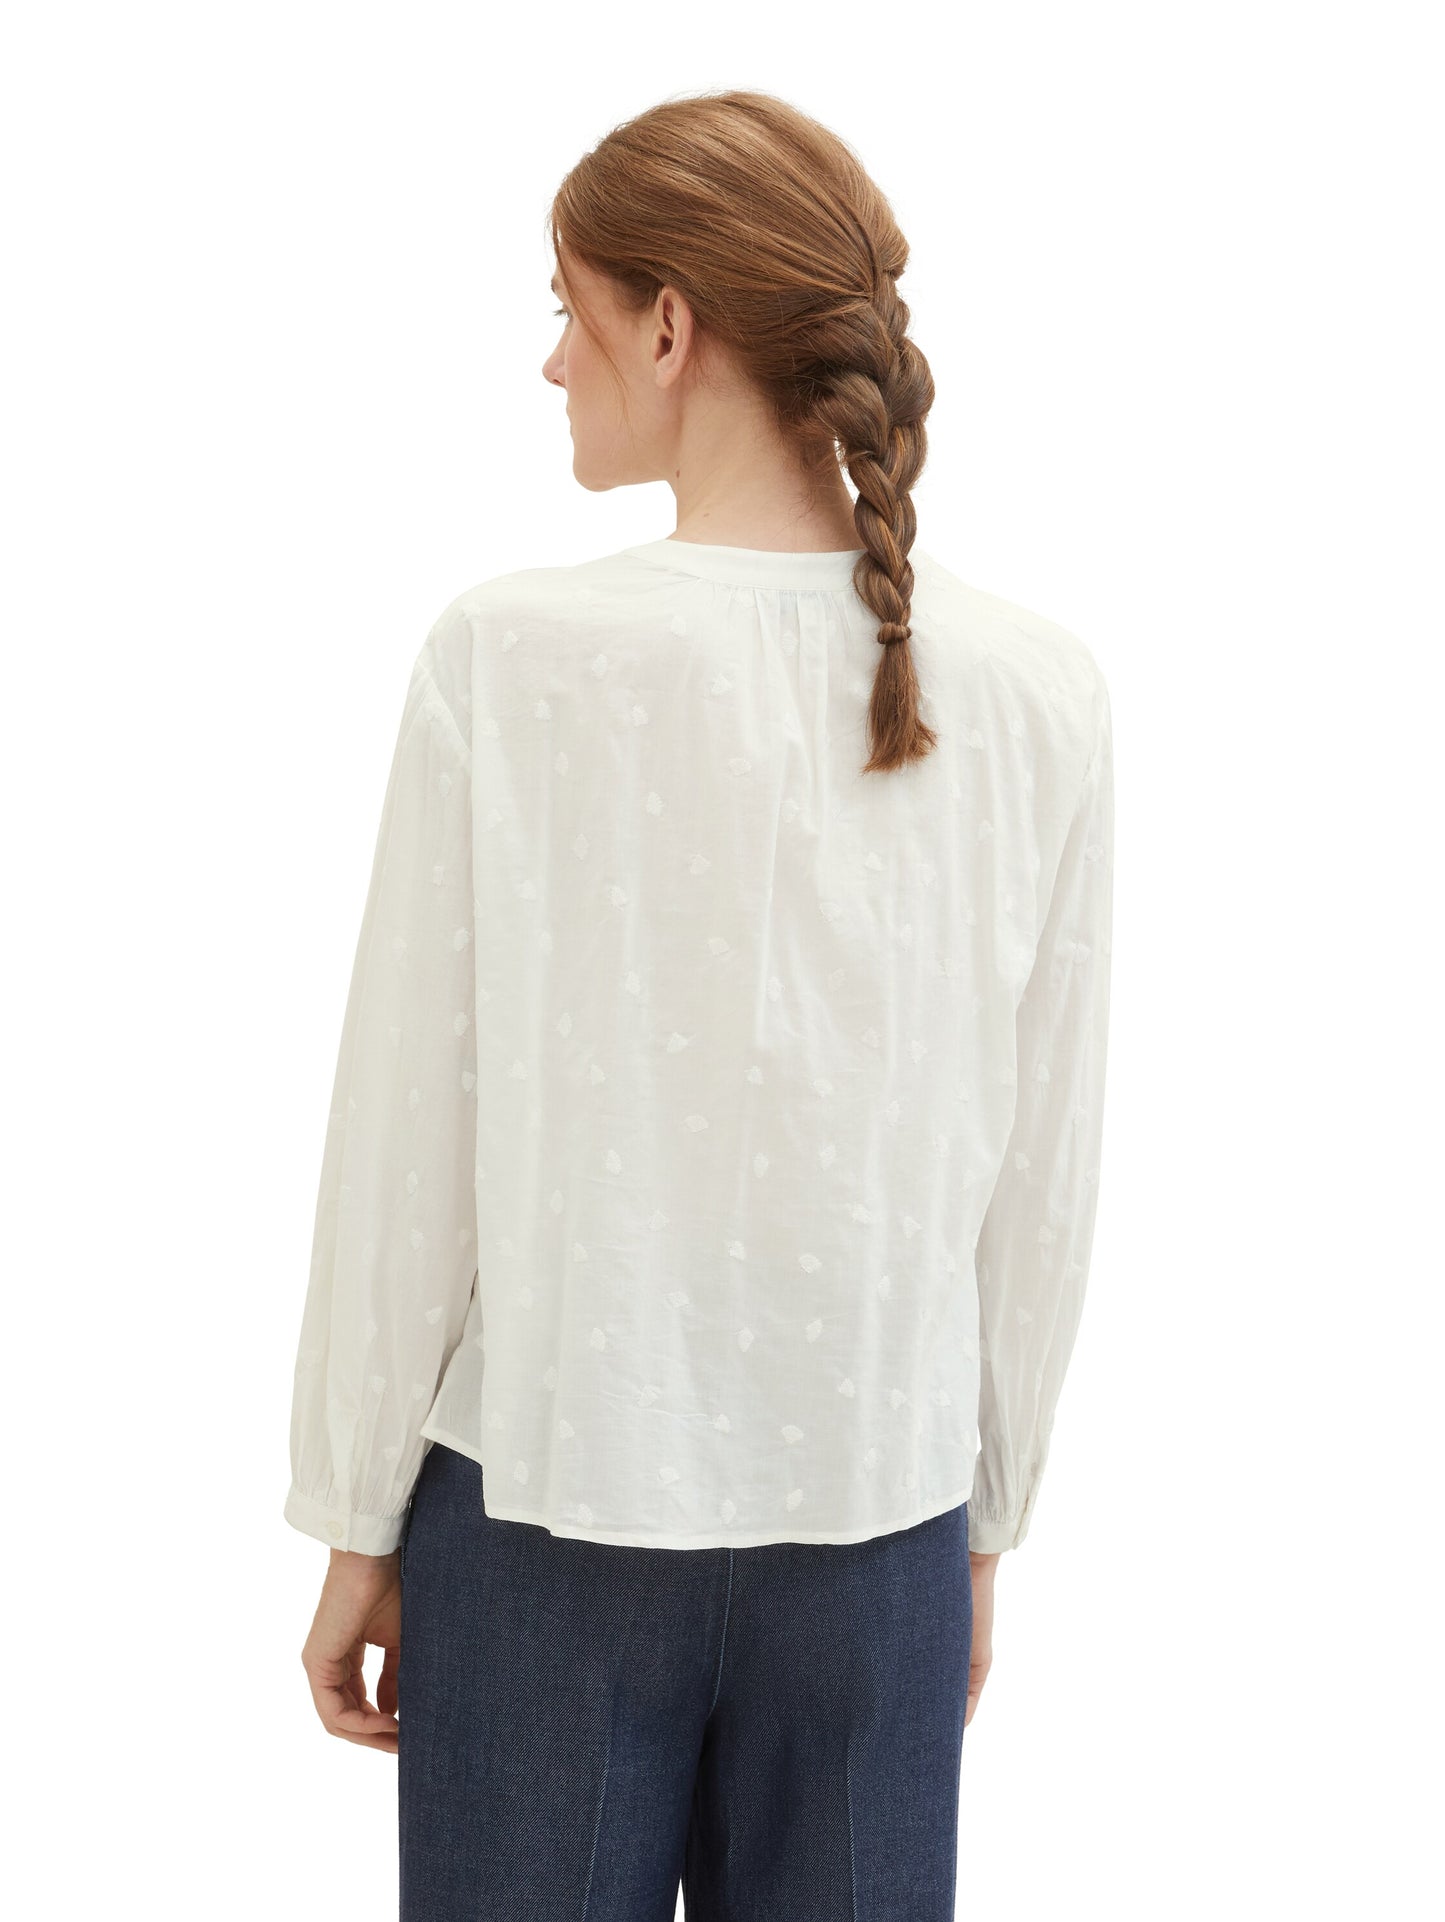 embroidered blouse - 1040313